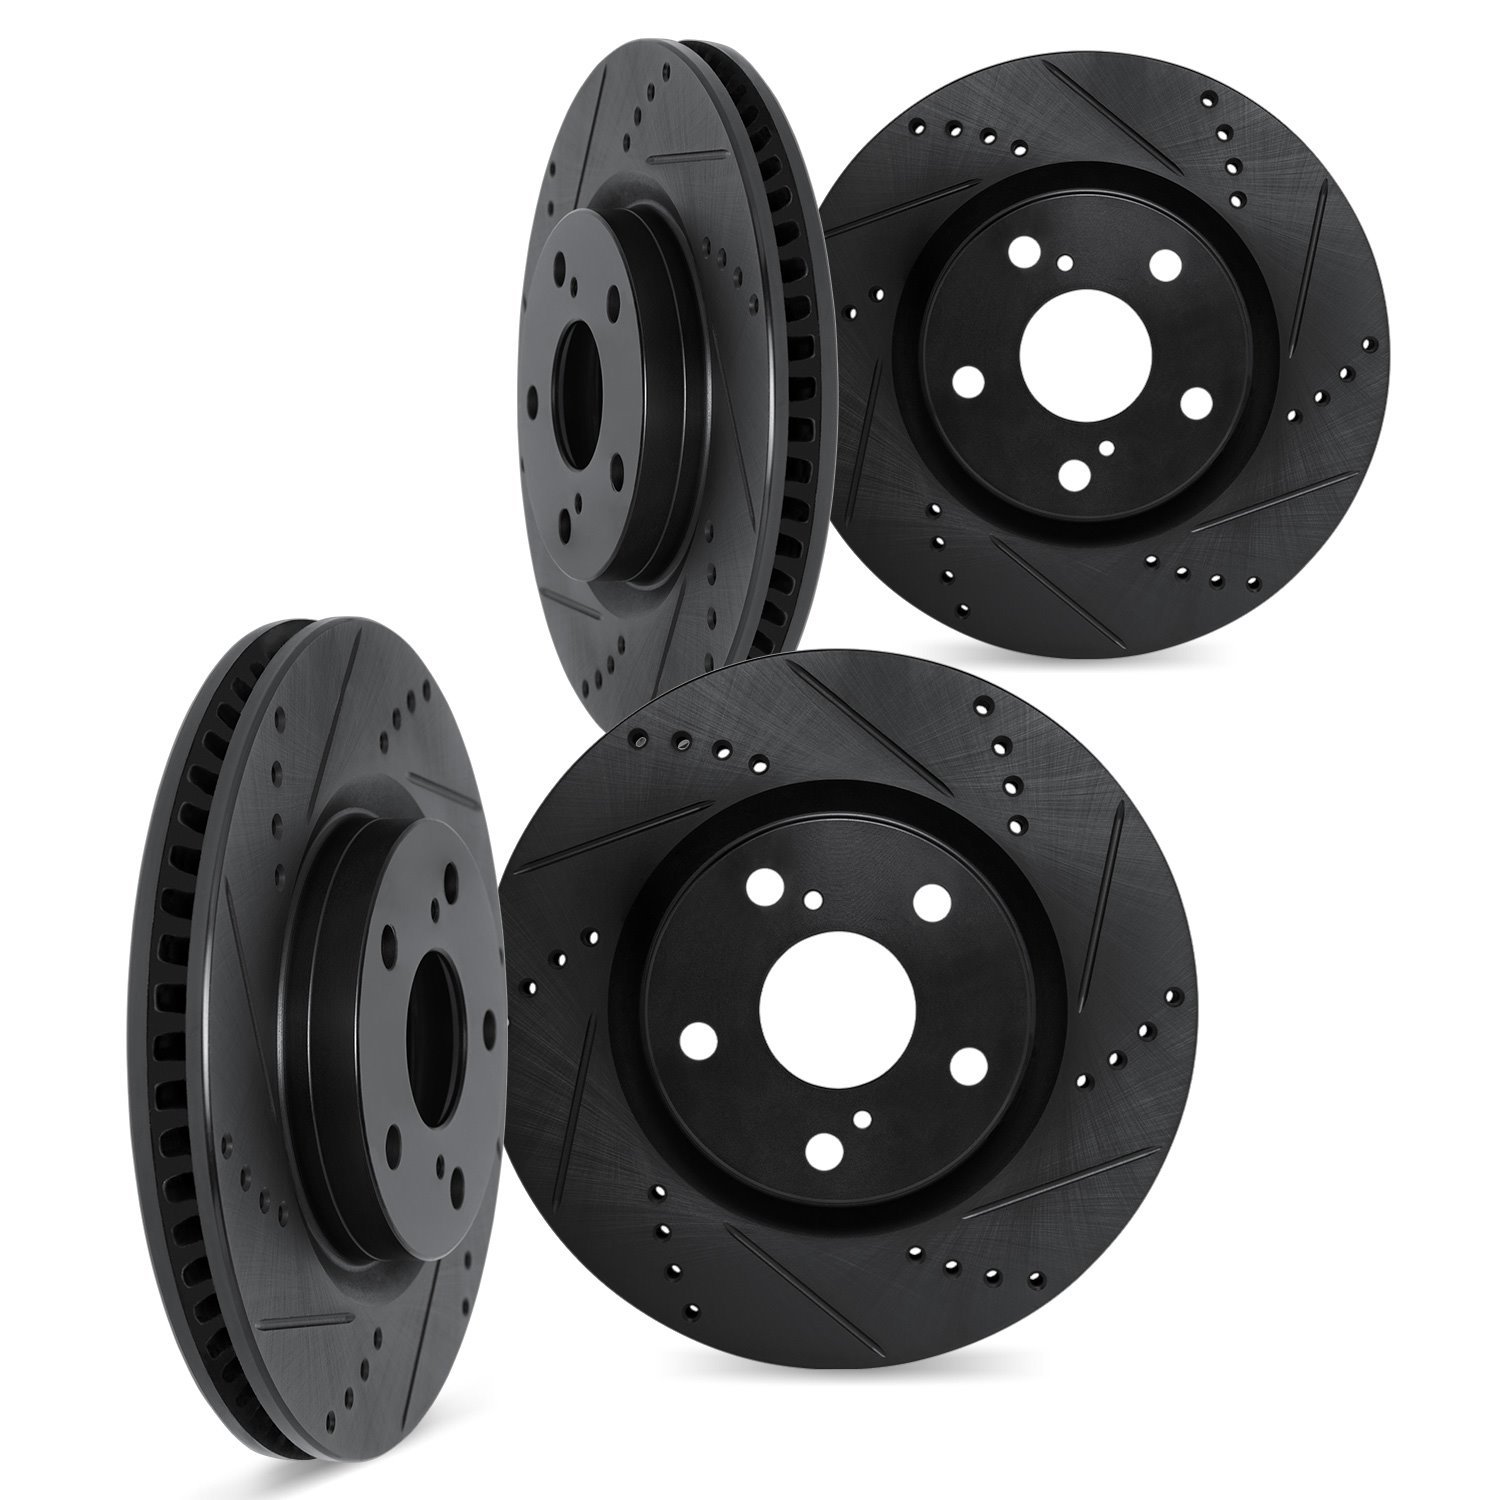 8004-31105 Drilled/Slotted Brake Rotors [Black], 2009-2016 BMW, Position: Front and Rear